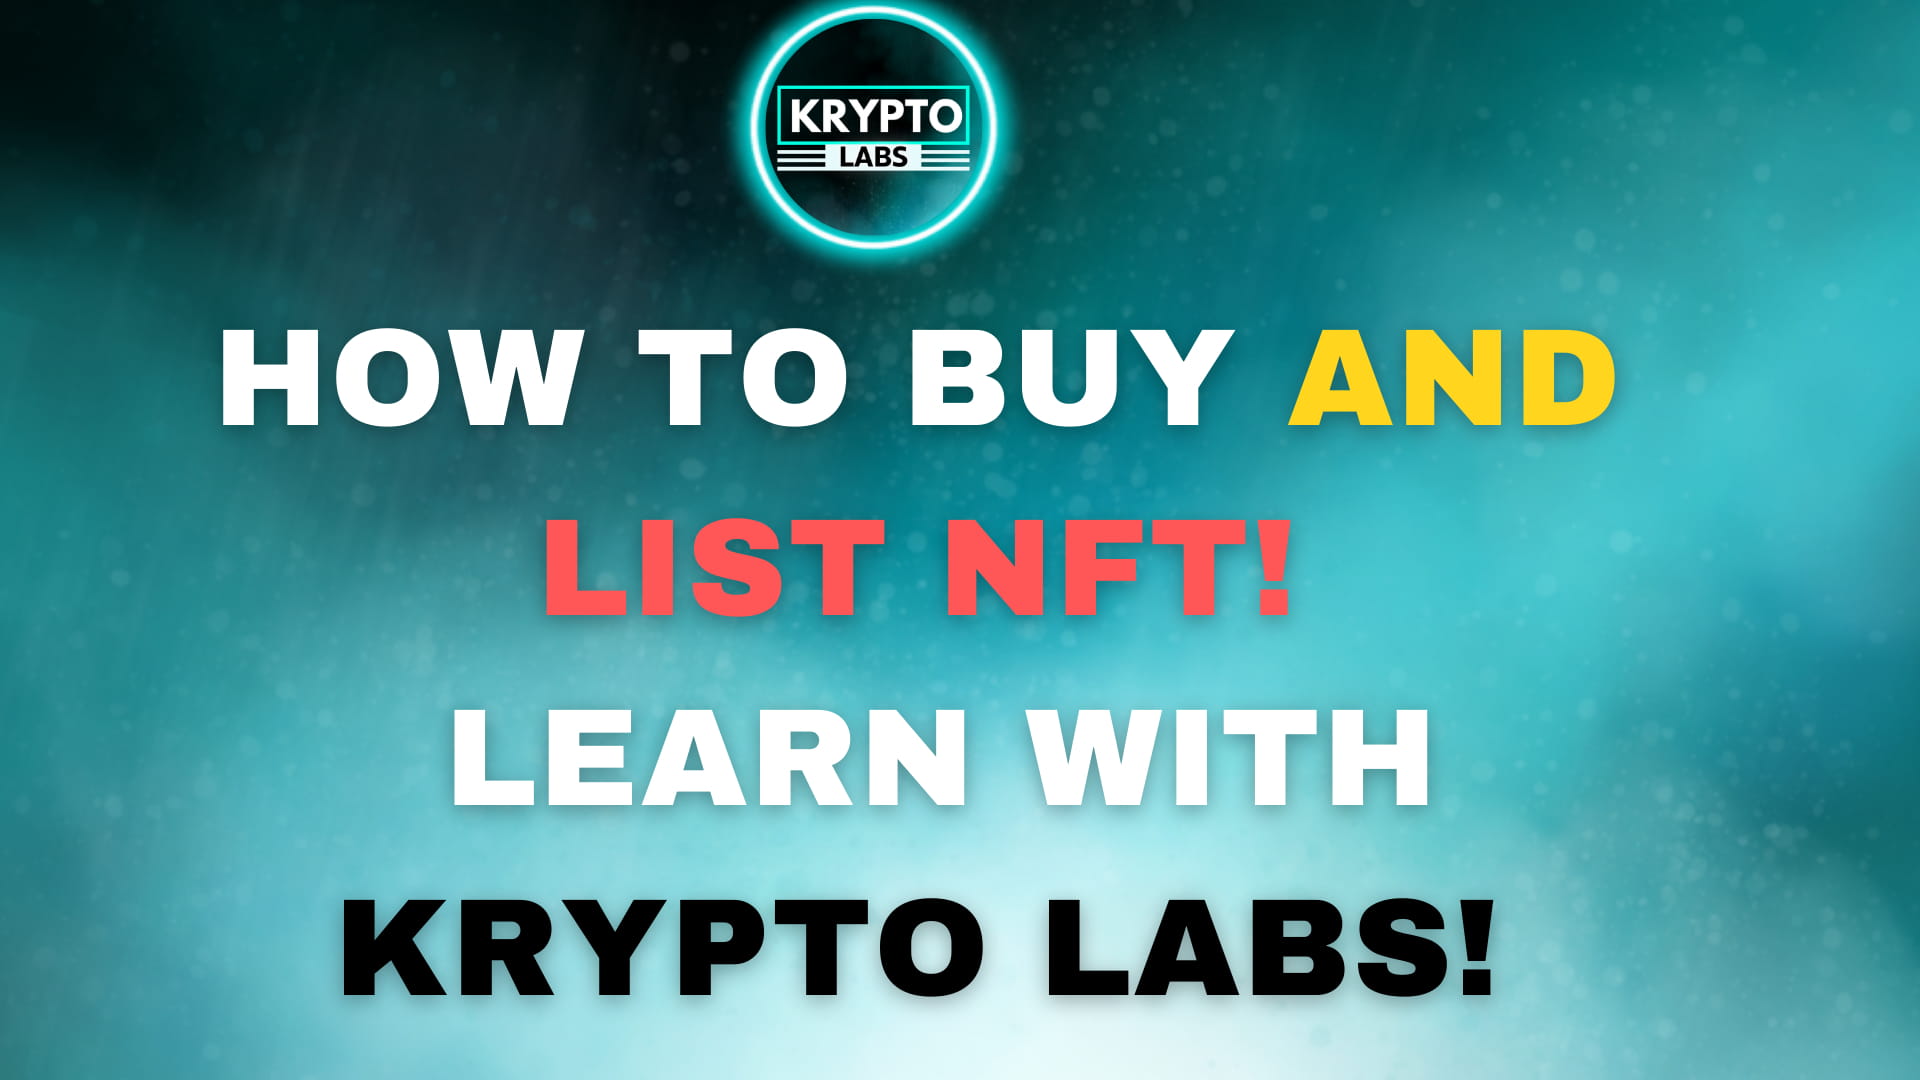 HOW TO BUY AND LIST NFT | BEGINNERS GUIDE